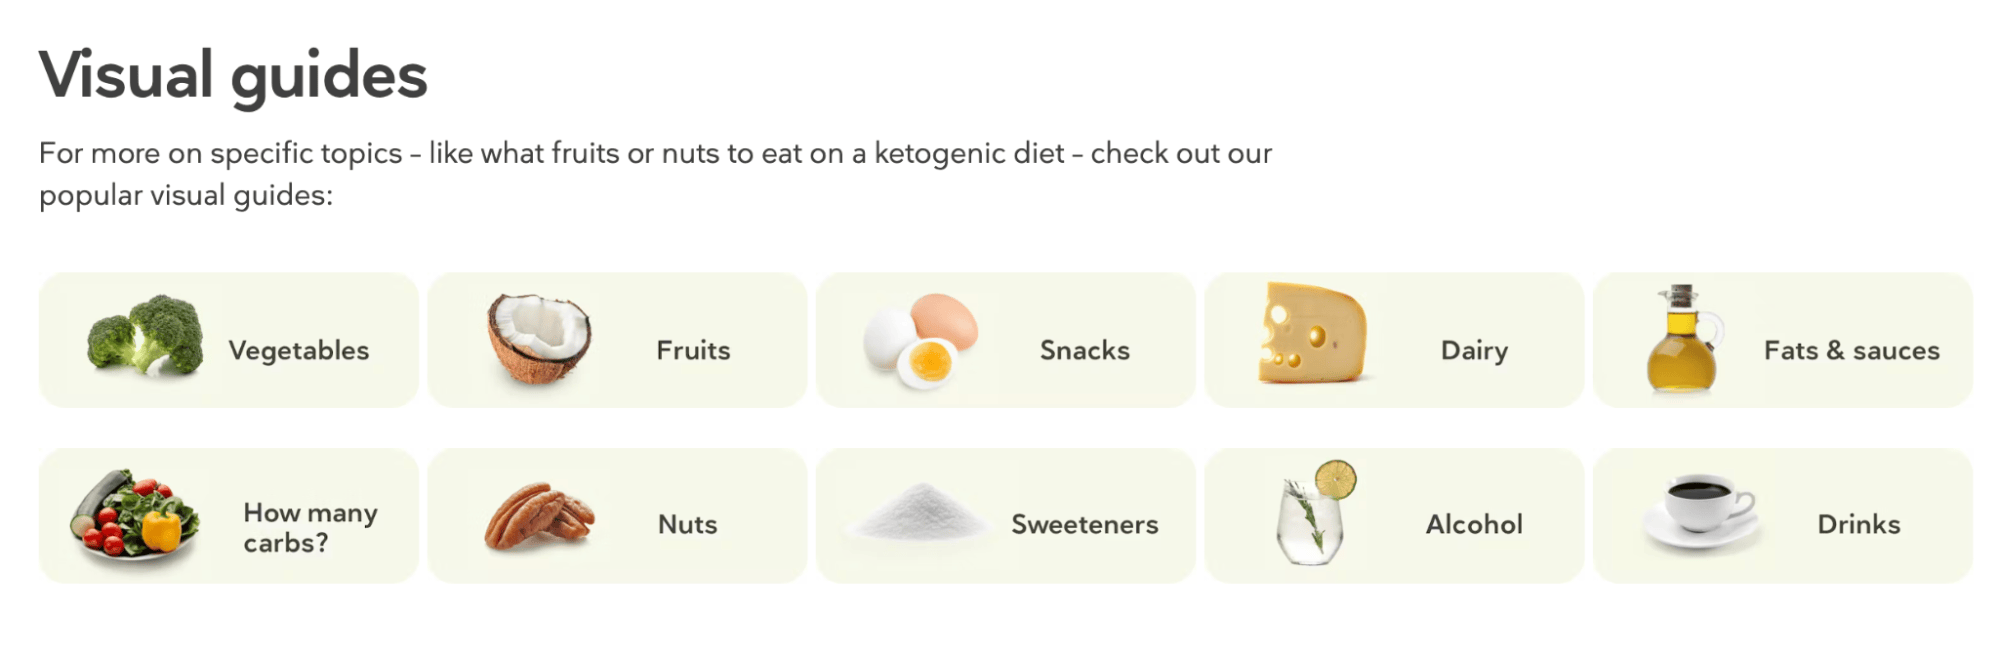 Diet Doctor's "Visual guides" section of the website